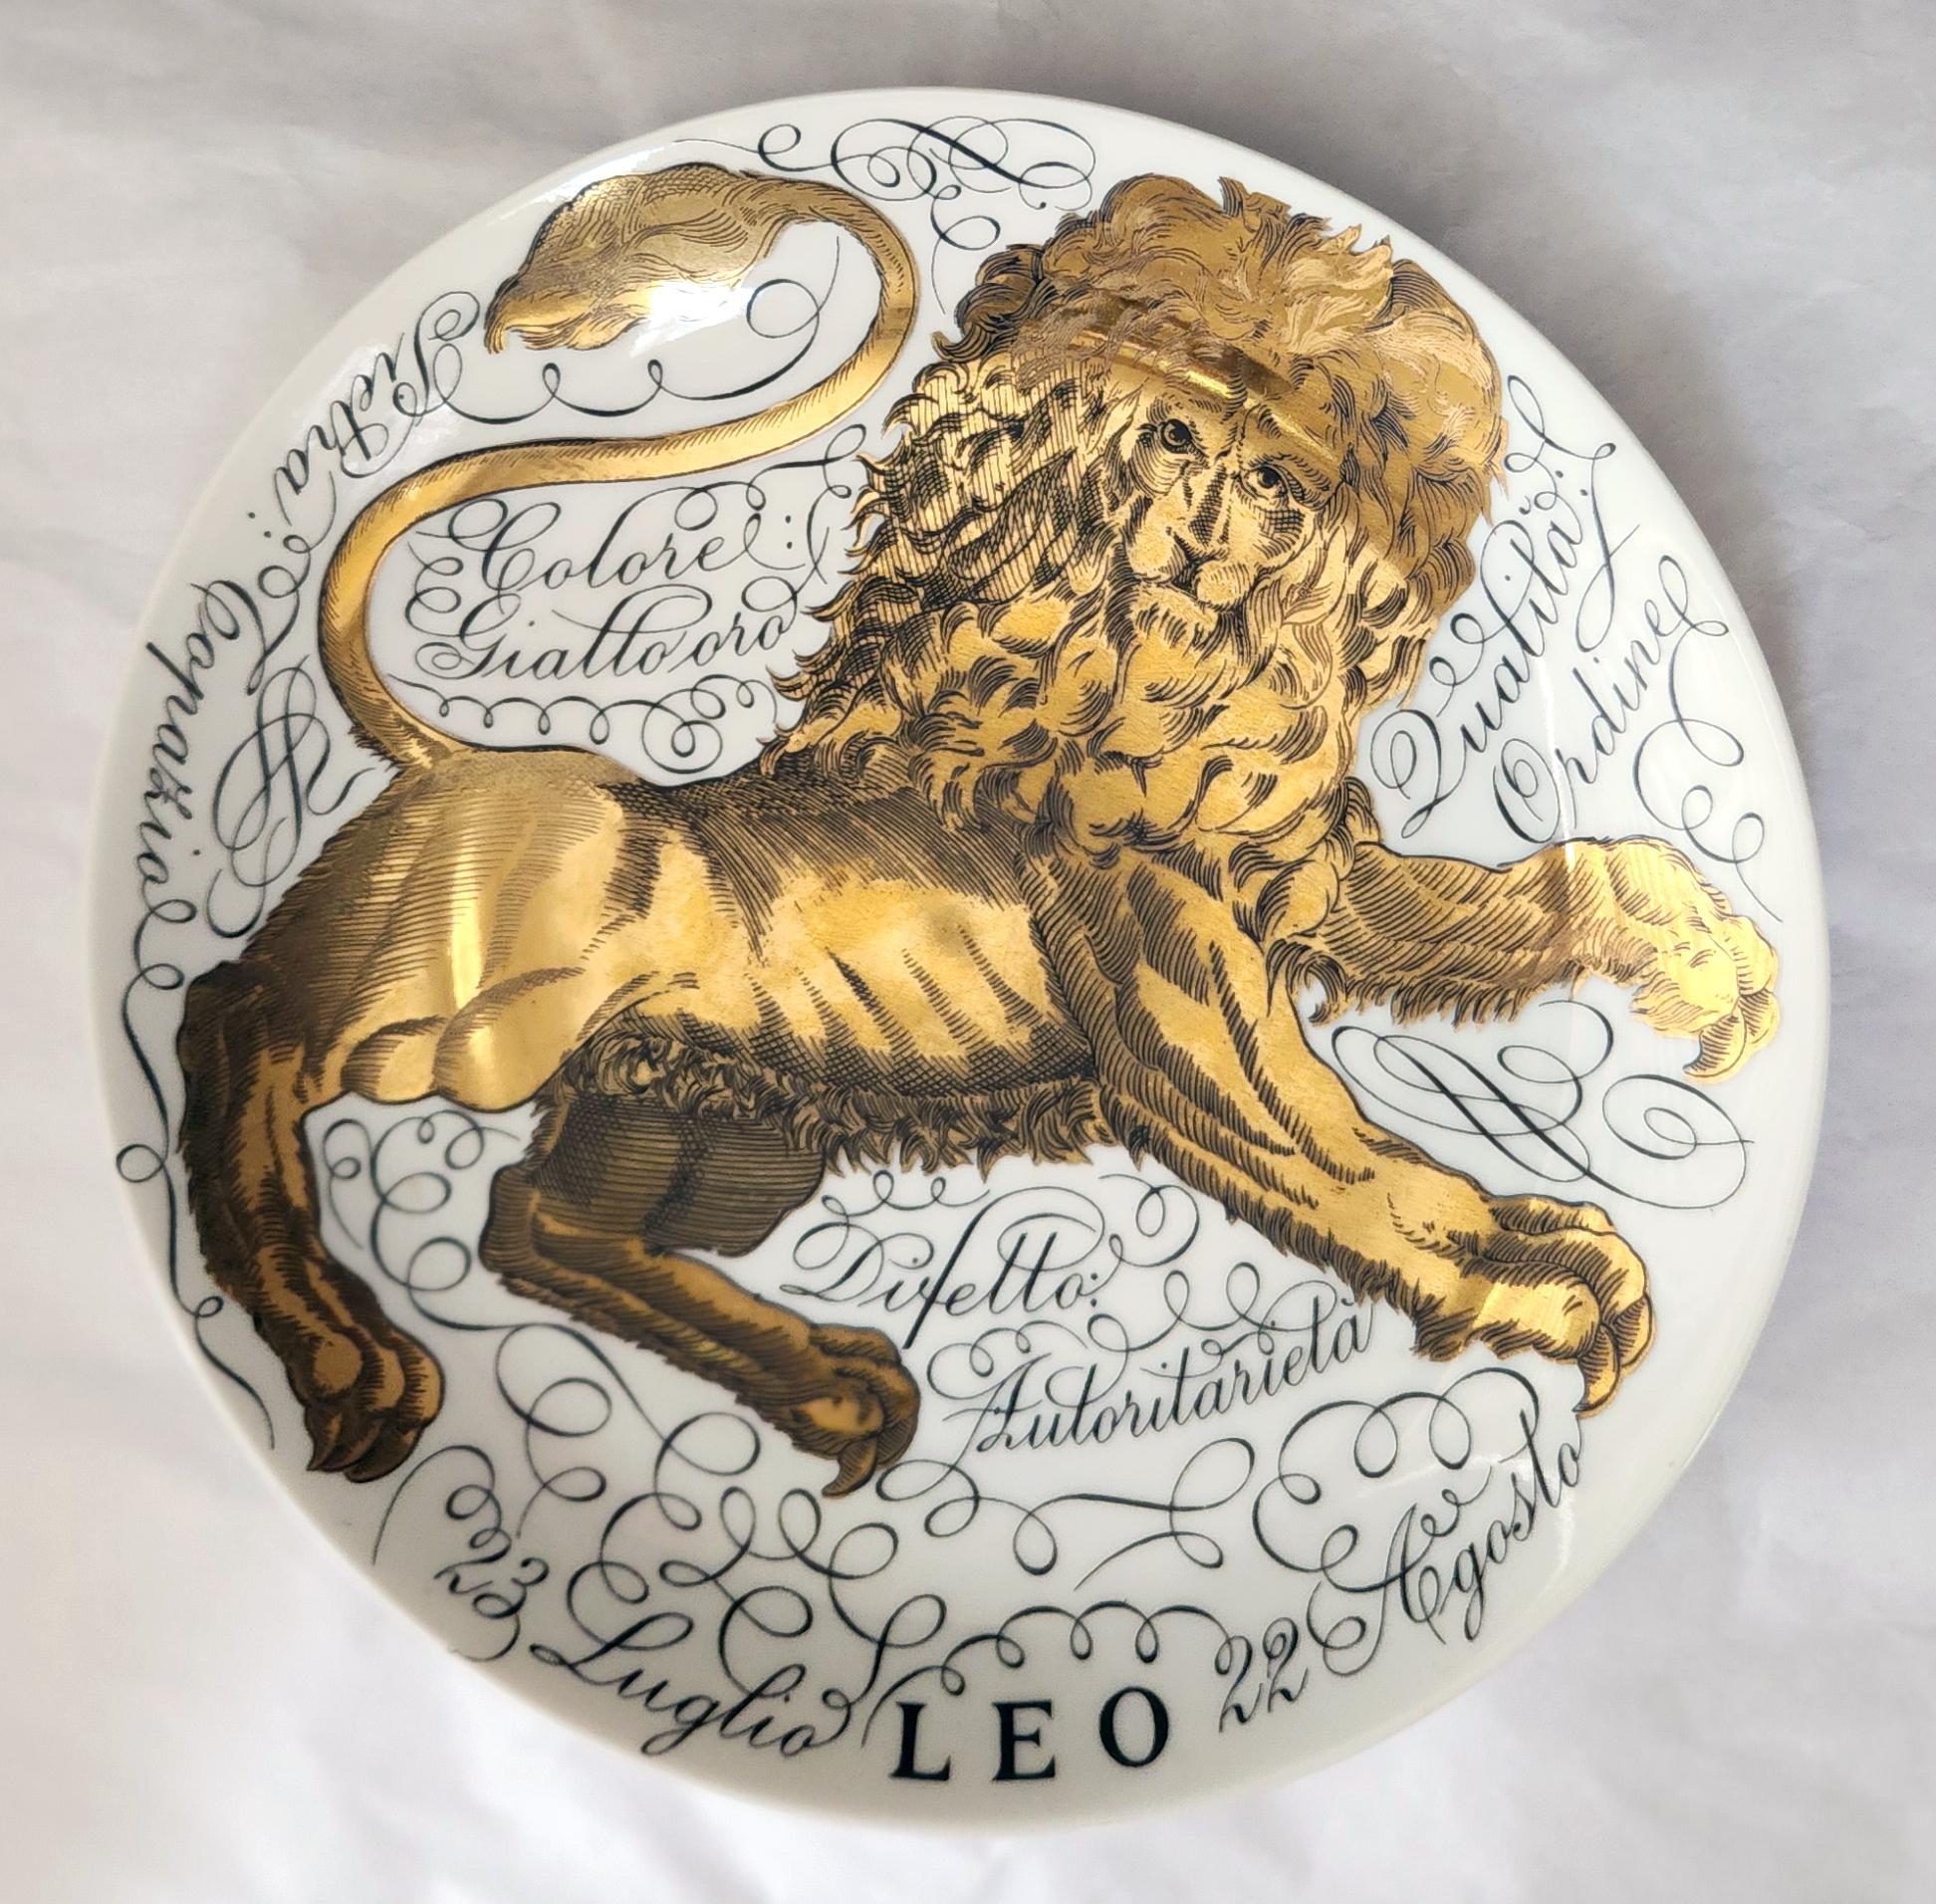 1965 Vintage Piero Fornasetti Porcelain Zodiac Plate, Astrological Sign Leo In Good Condition For Sale In Downingtown, PA